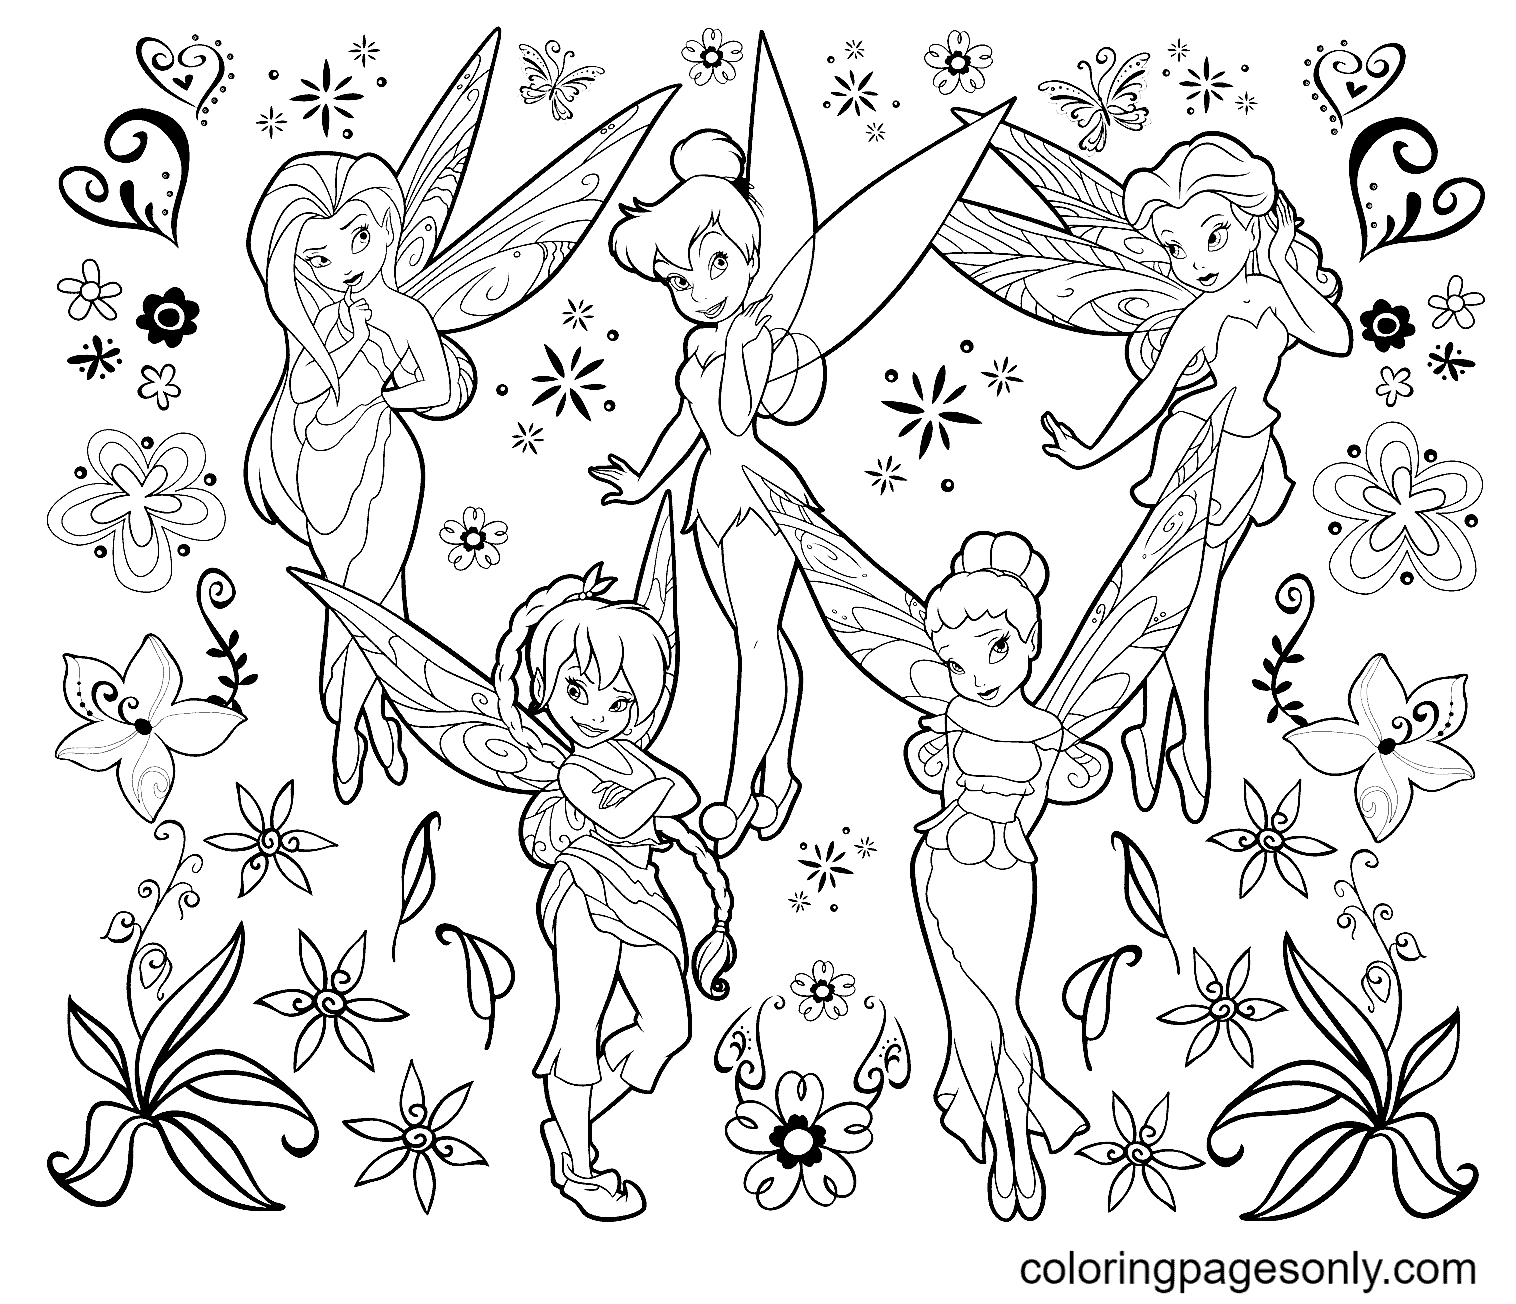 Tinkerbell Coloring Pages Inspiring